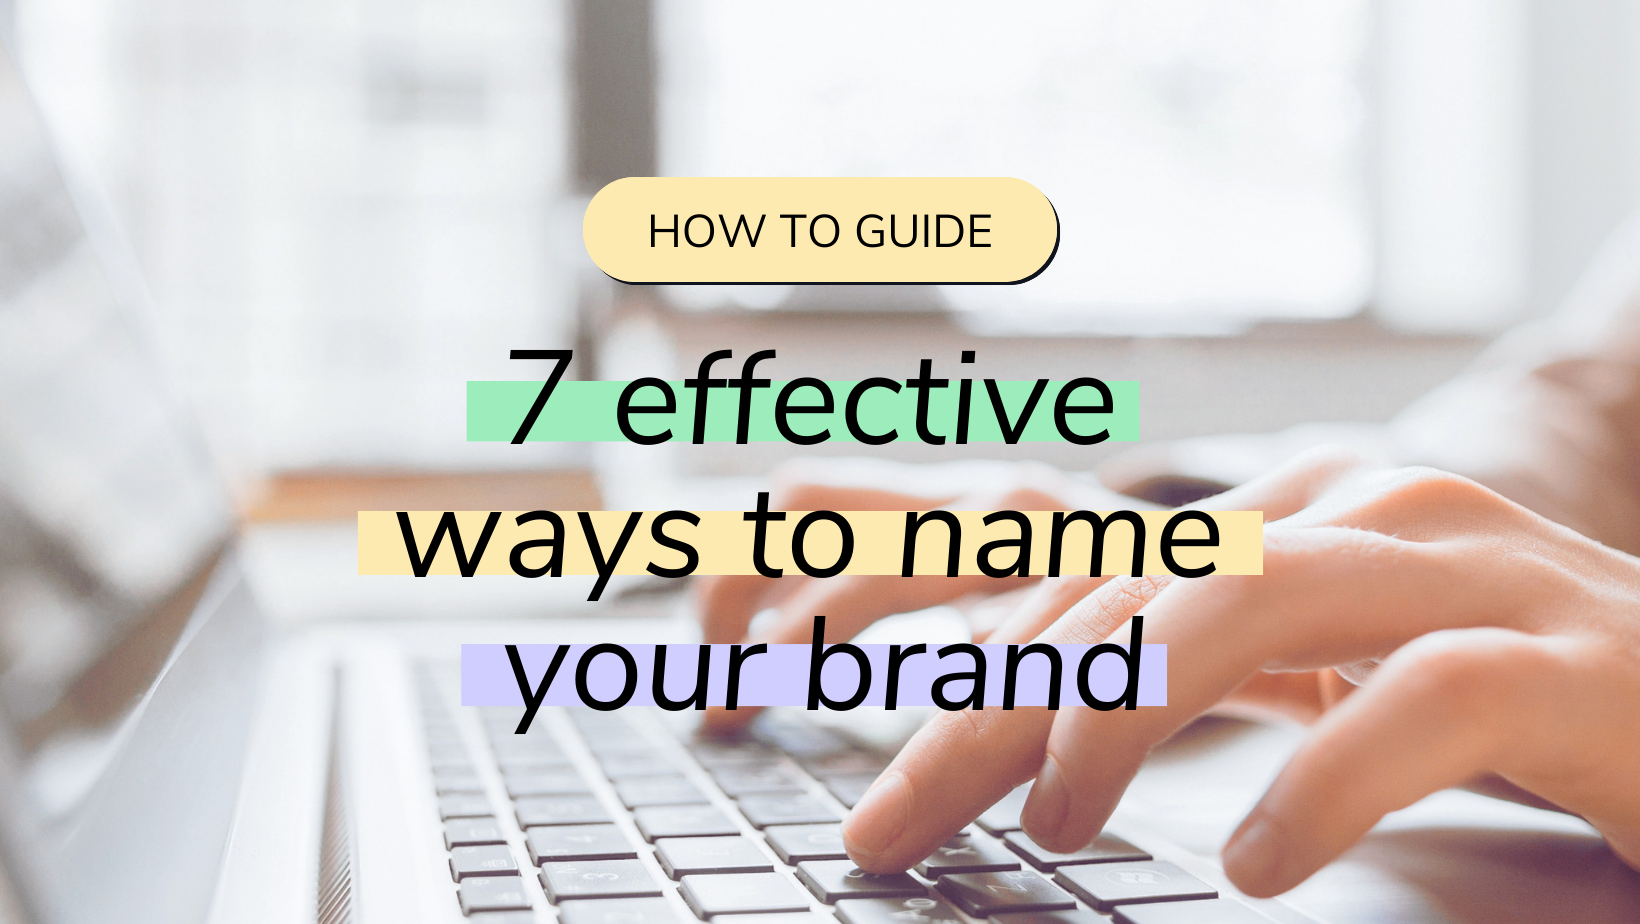 7 effective ways to name your brand →